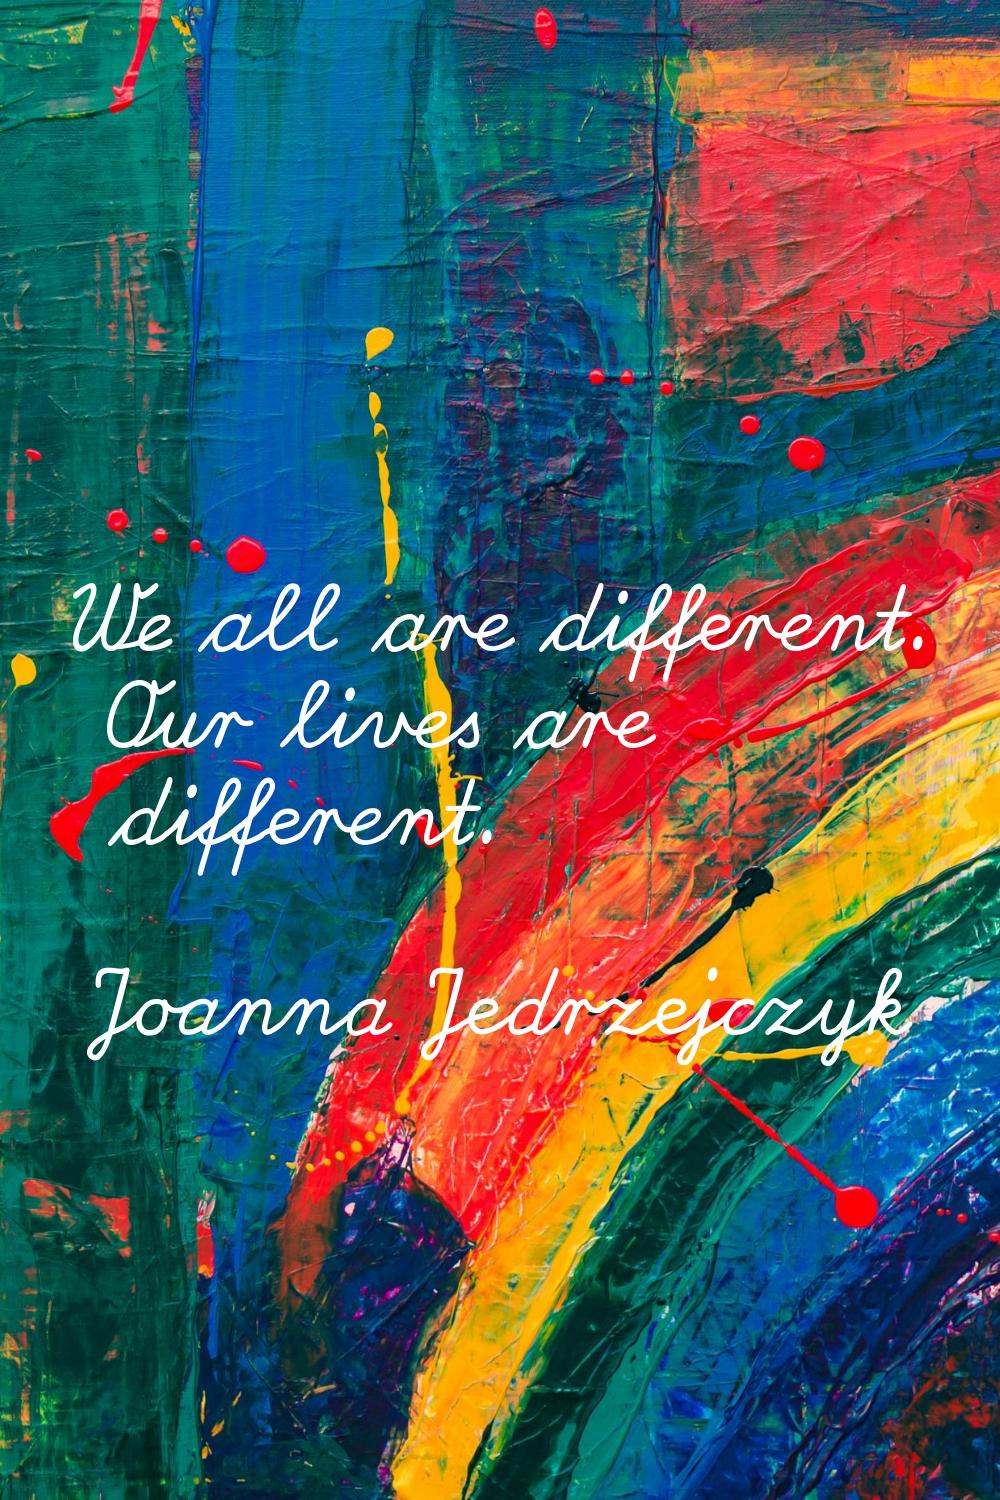 We all are different. Our lives are different.